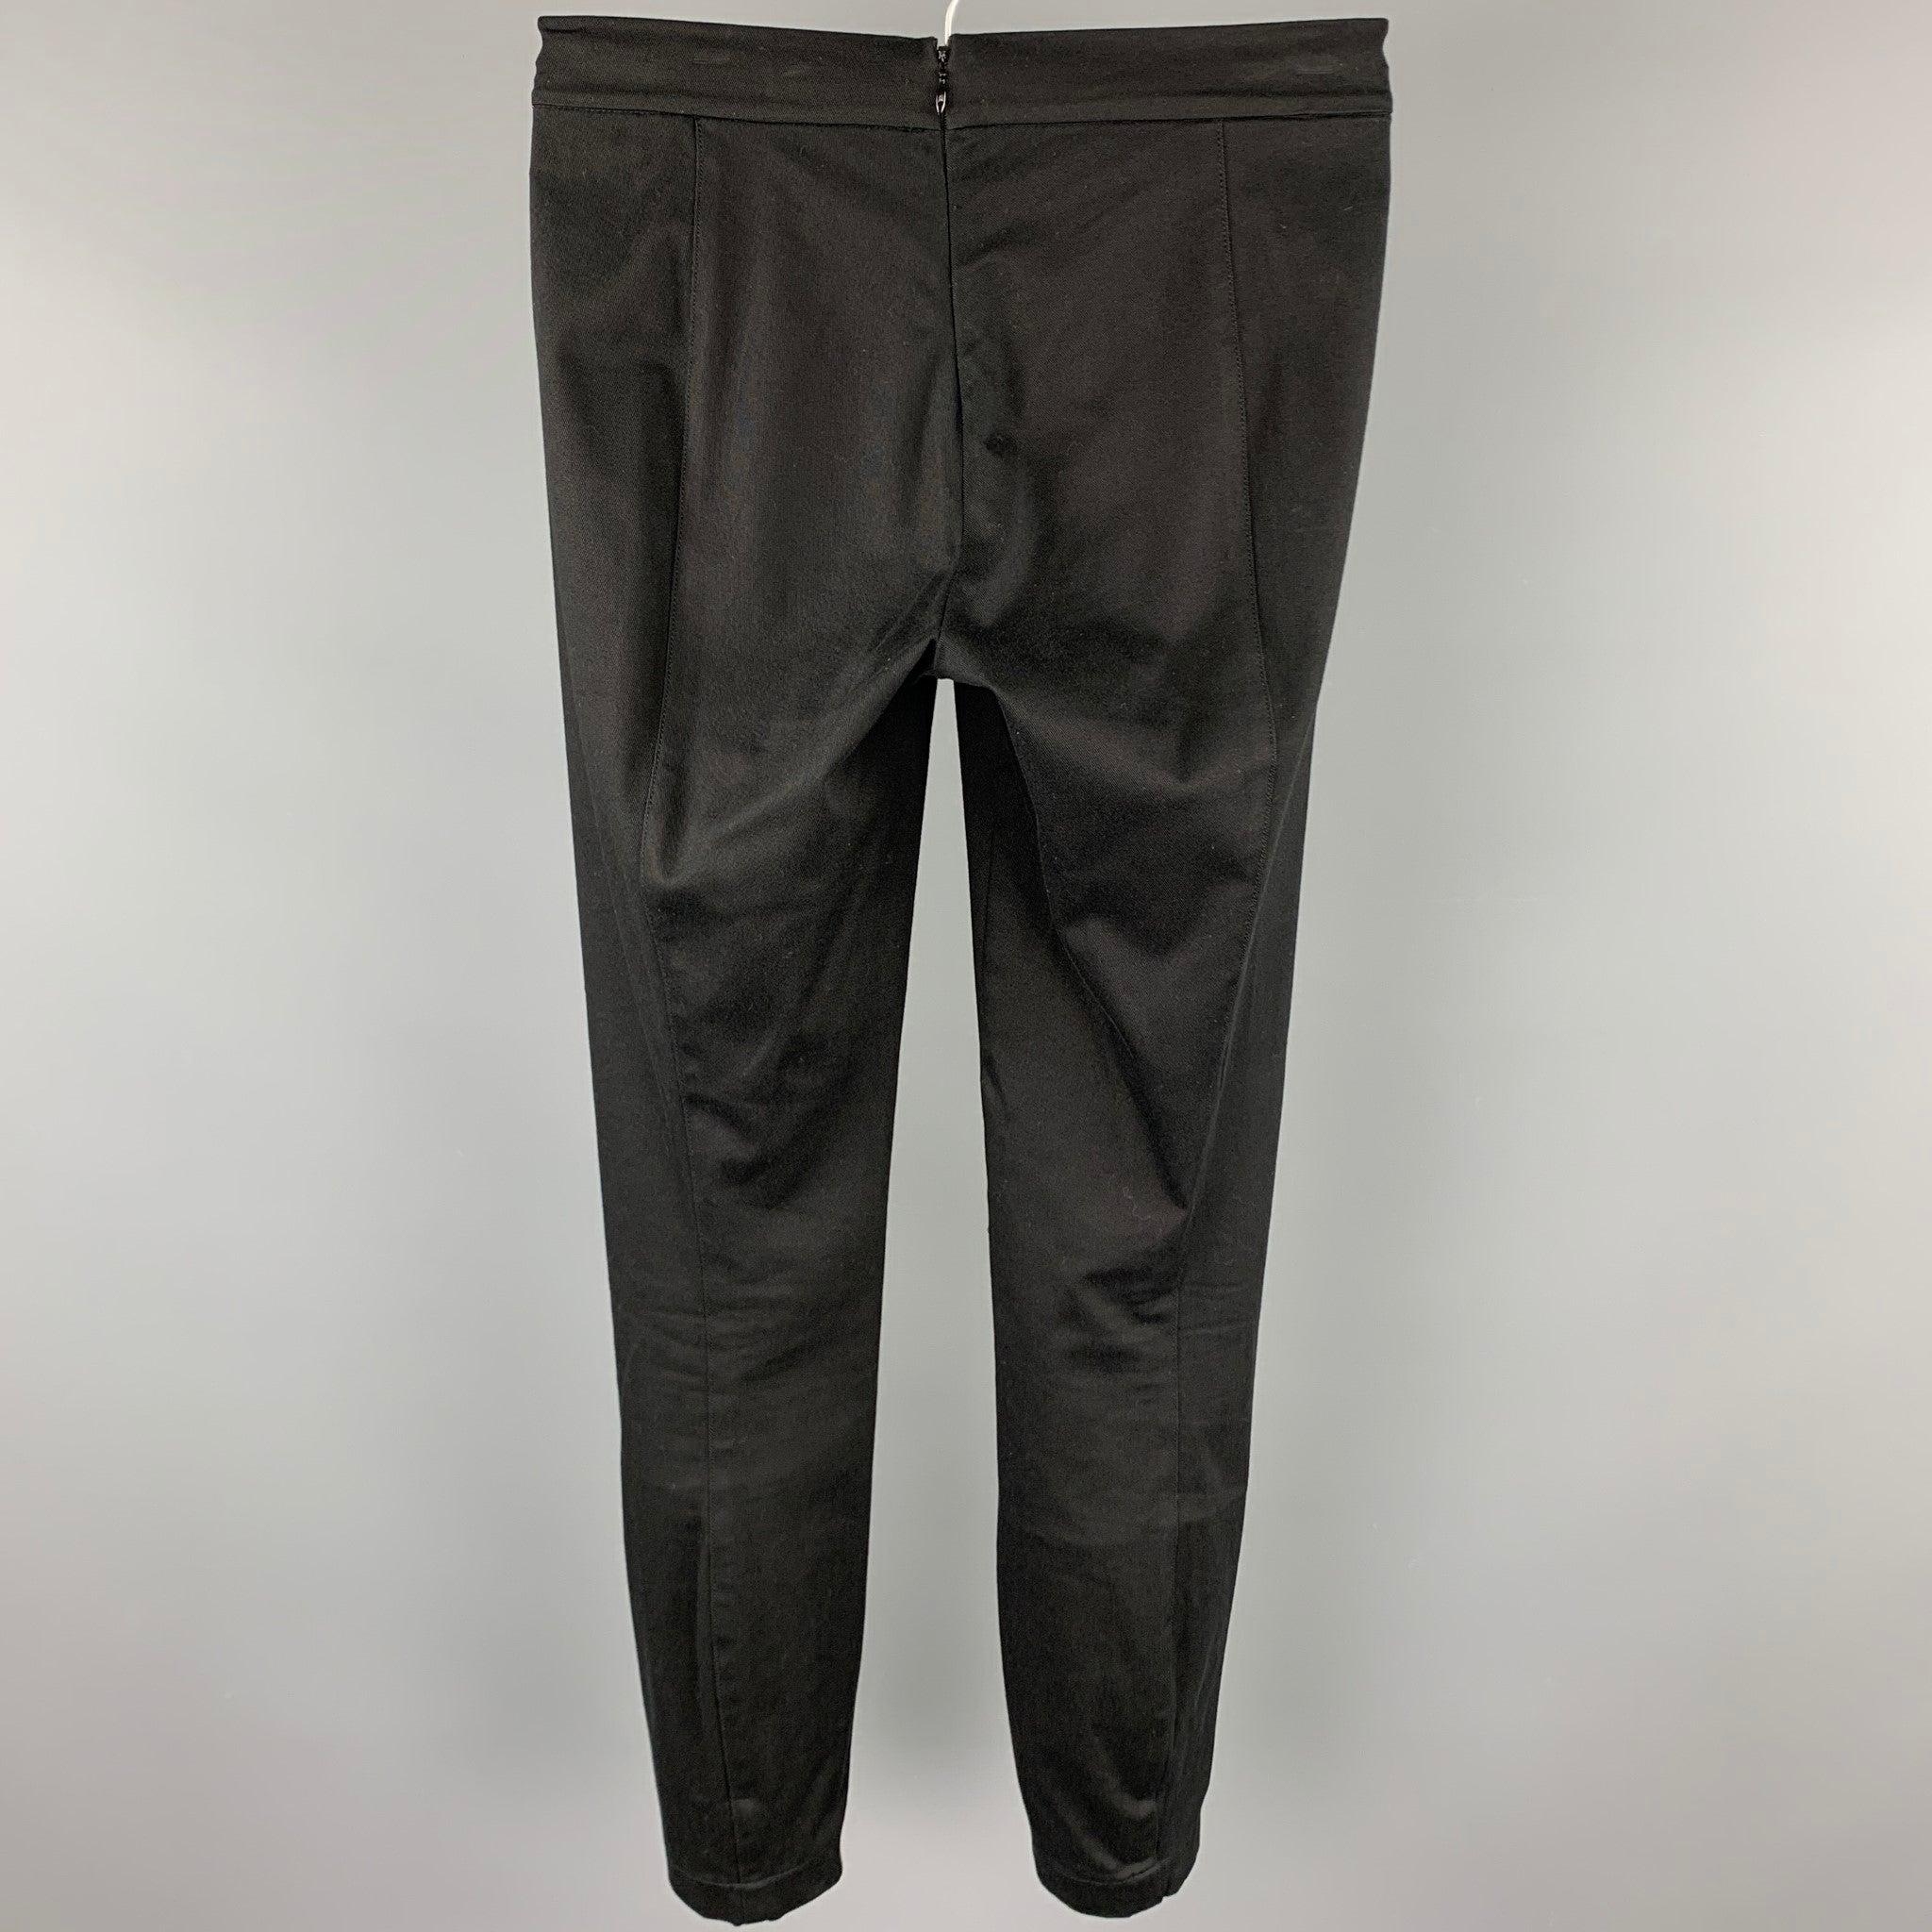 RALPH LAUREN Blue Label leggings comes in a black / elastane featuring a back zipper closure.Very Good
Pre-Owned Condition. 

Marked:   2 

Measurements: 
  Waist: 27 inches  Rise: 9 inches  Inseam: 28 inches 
  
  
 
Reference: 92890
Category: